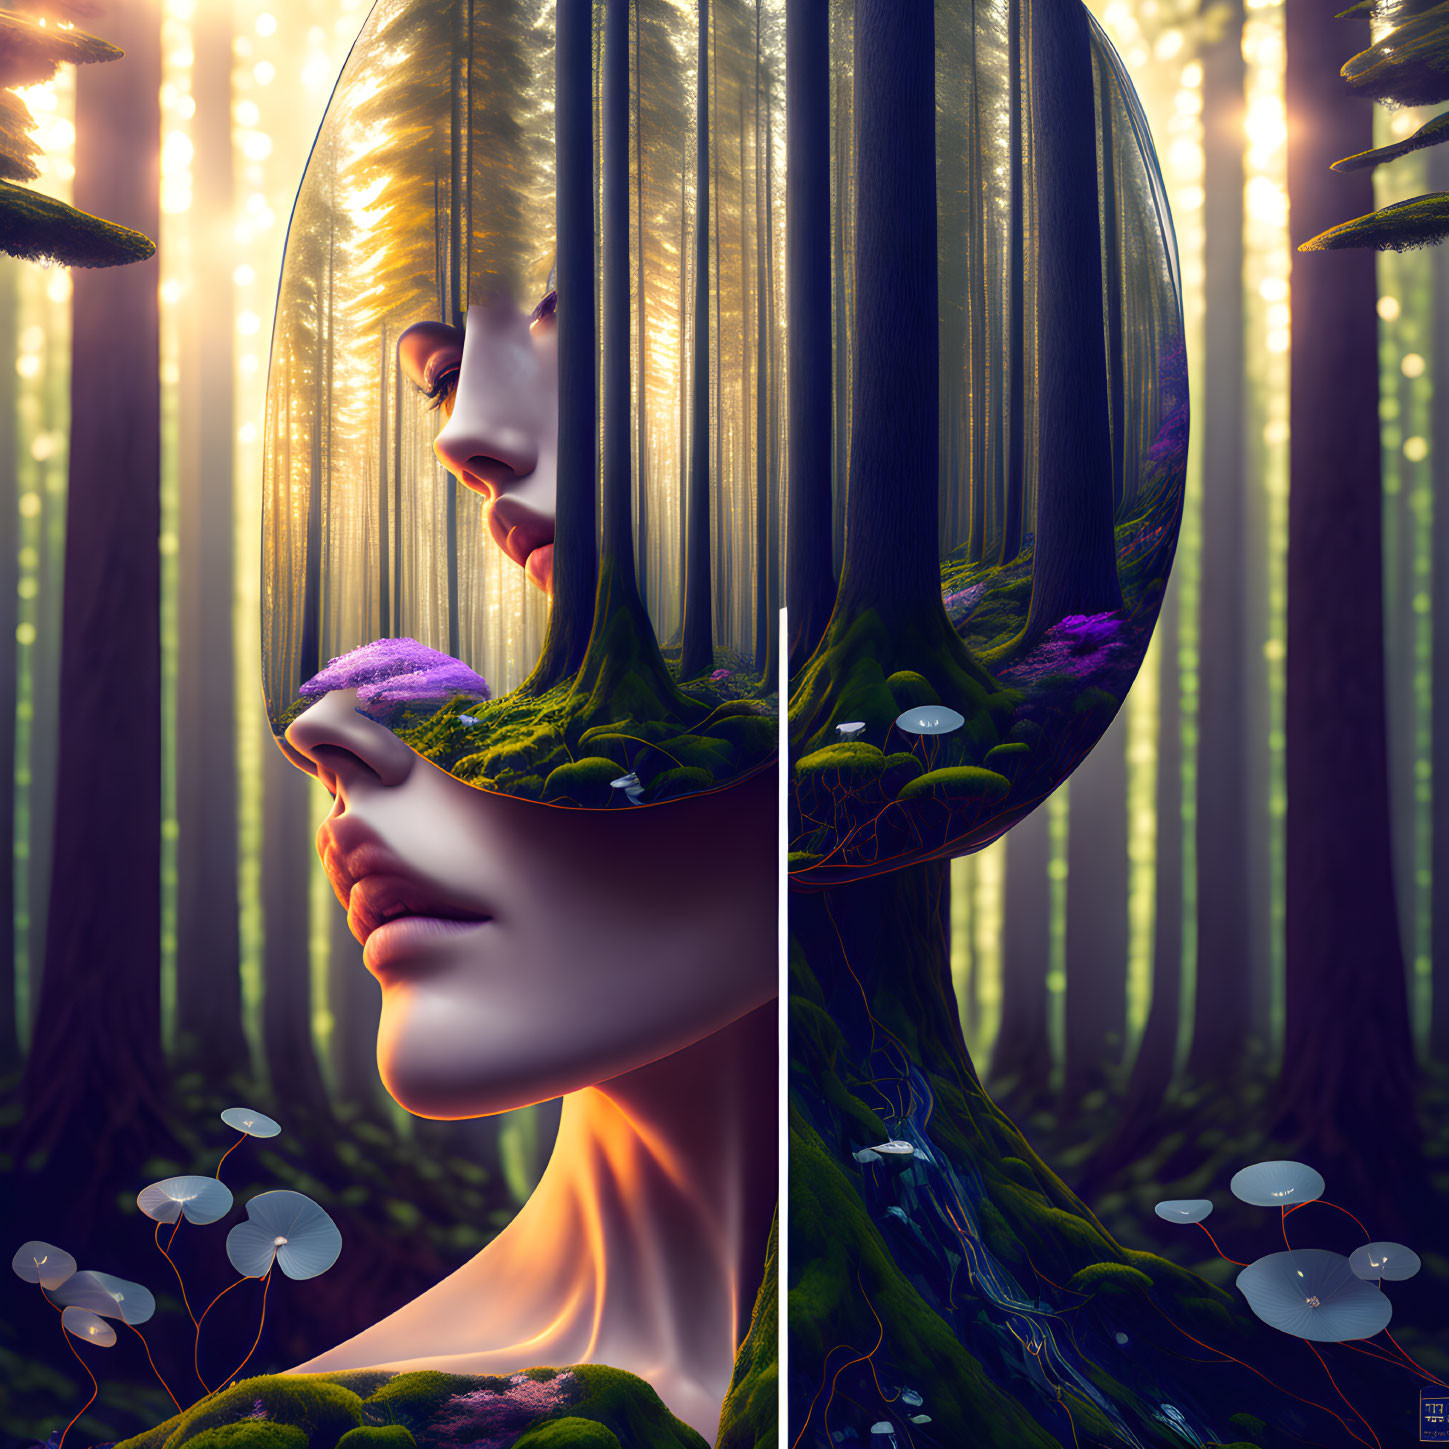 Surreal portrait blending woman's face with forest scene